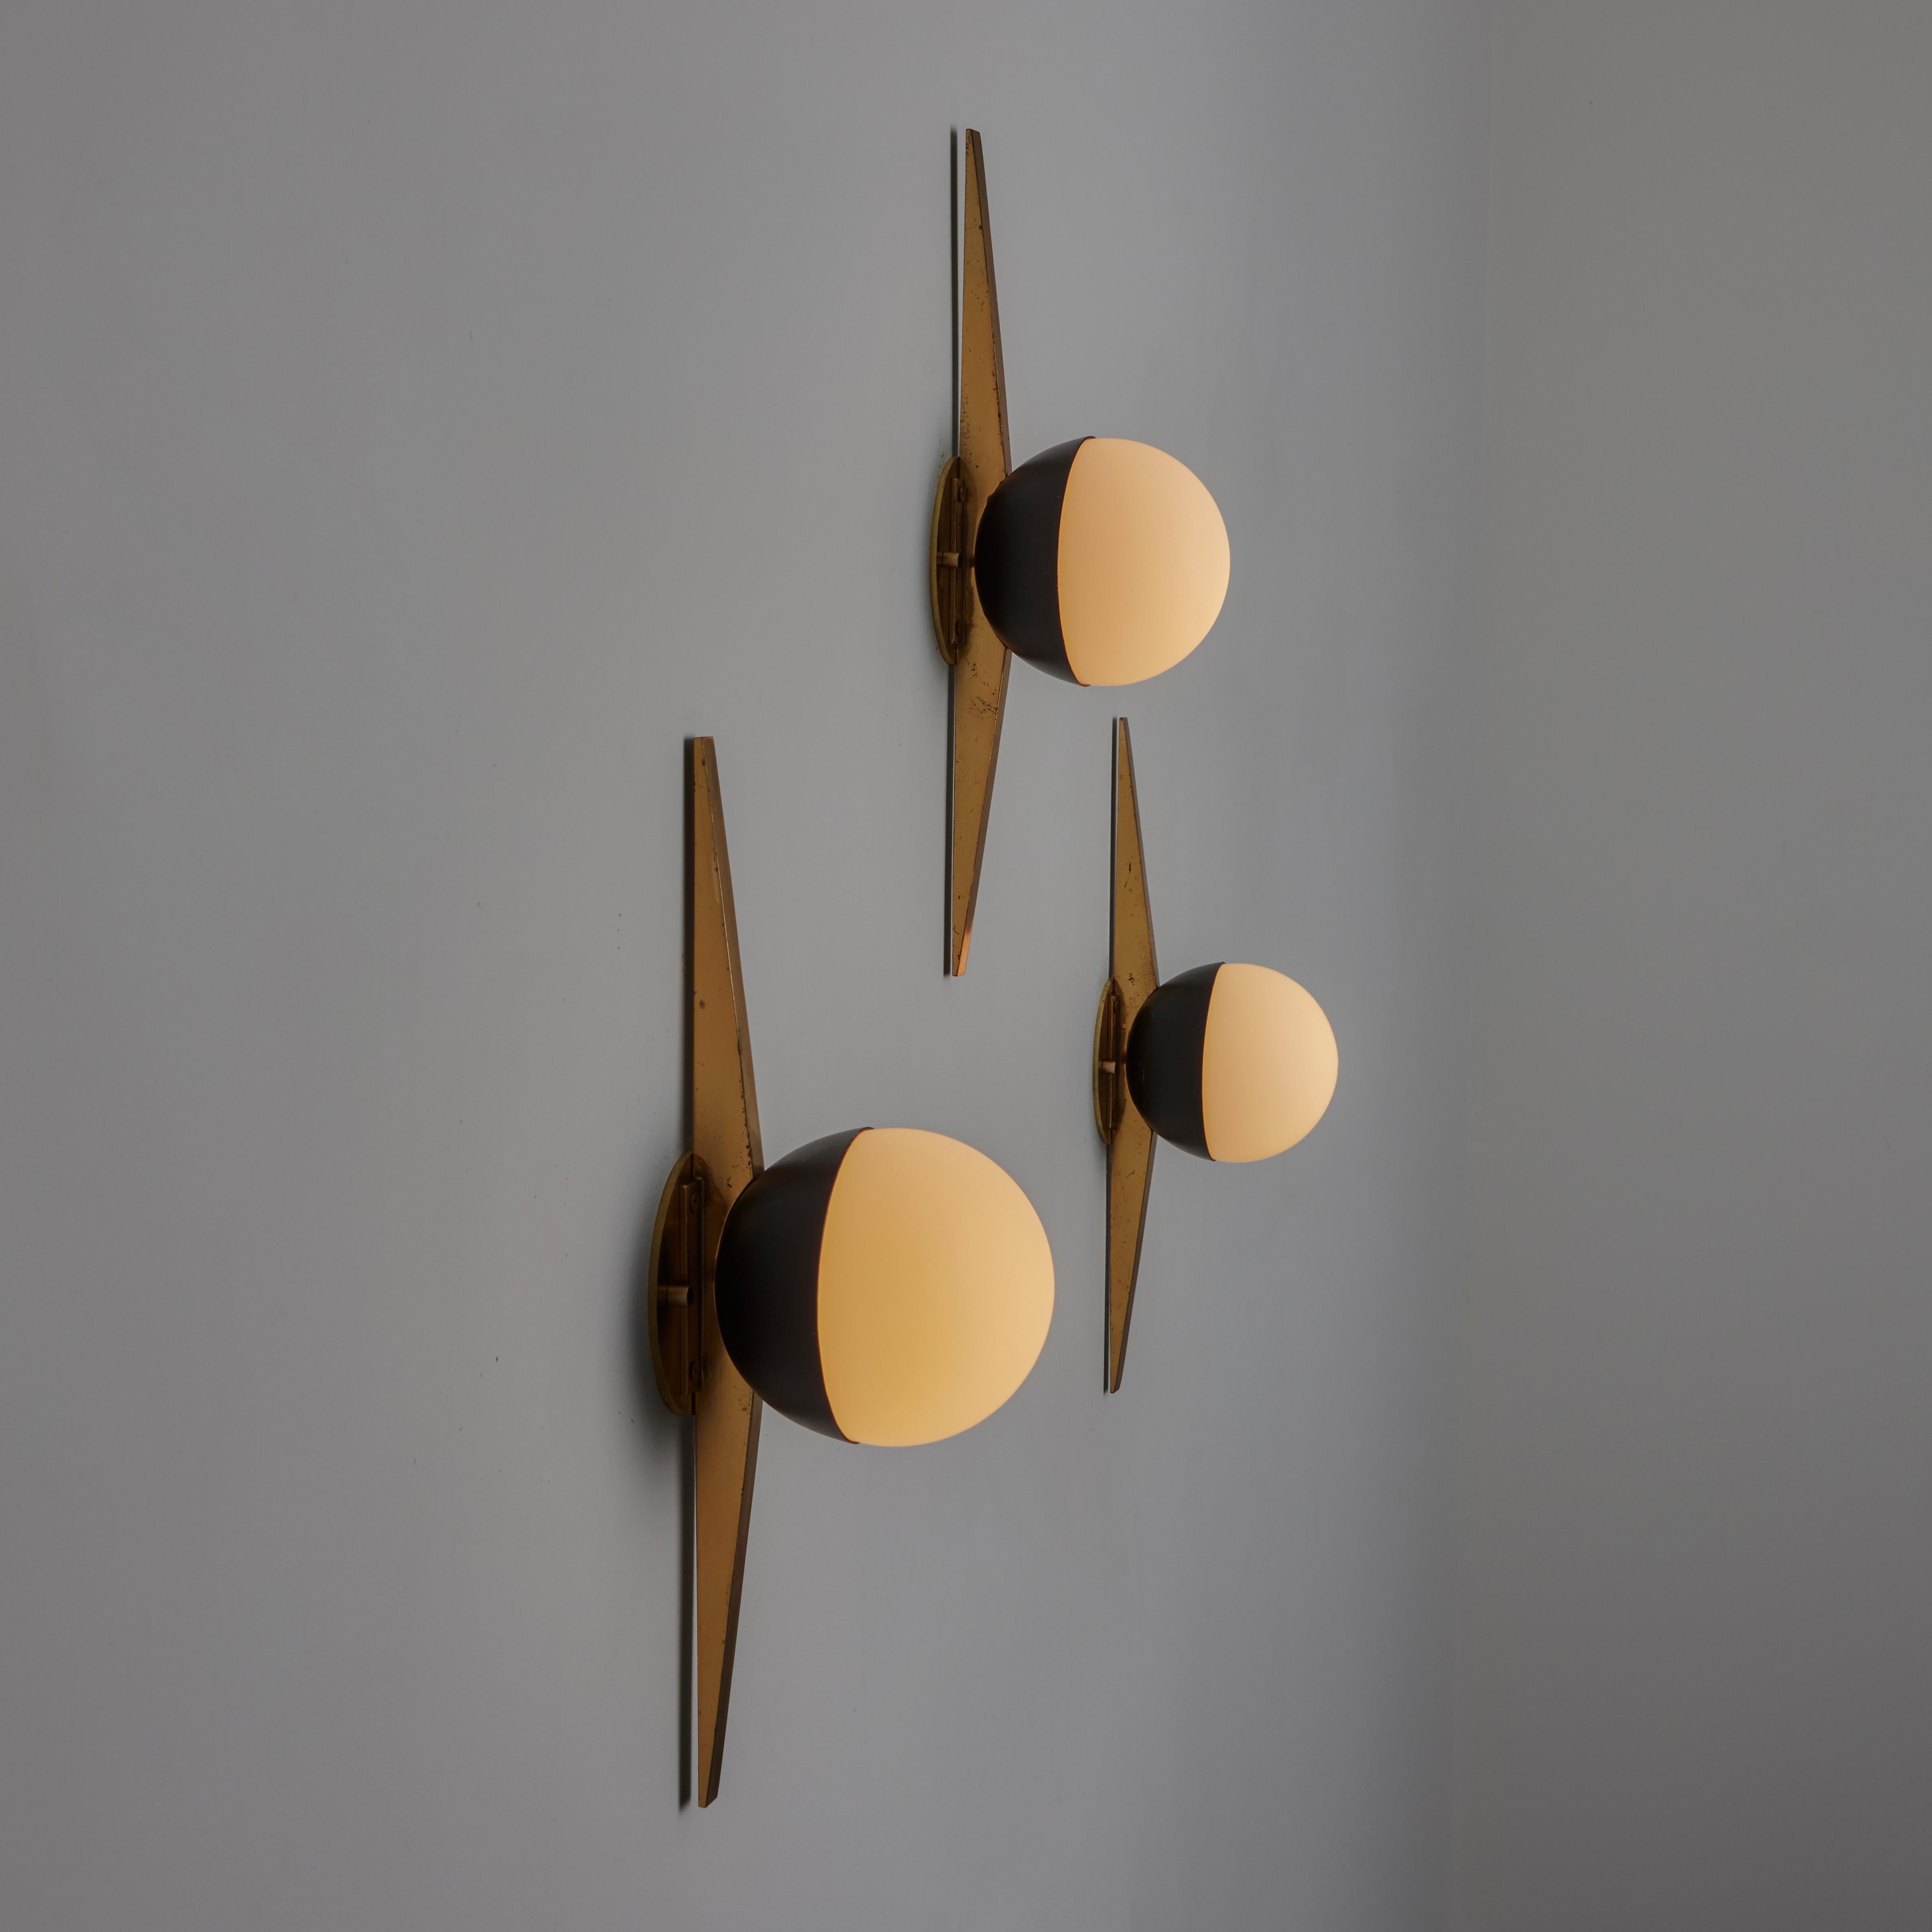 Sconces by Stilnovo. Designed and manufactured in Italy, circa the 1950s. Emblem styled wall sconces featuring patinated polished brass extremities equal distant to the center opal glass diffuser. Each sconce holds an e14 socket type, adapted for